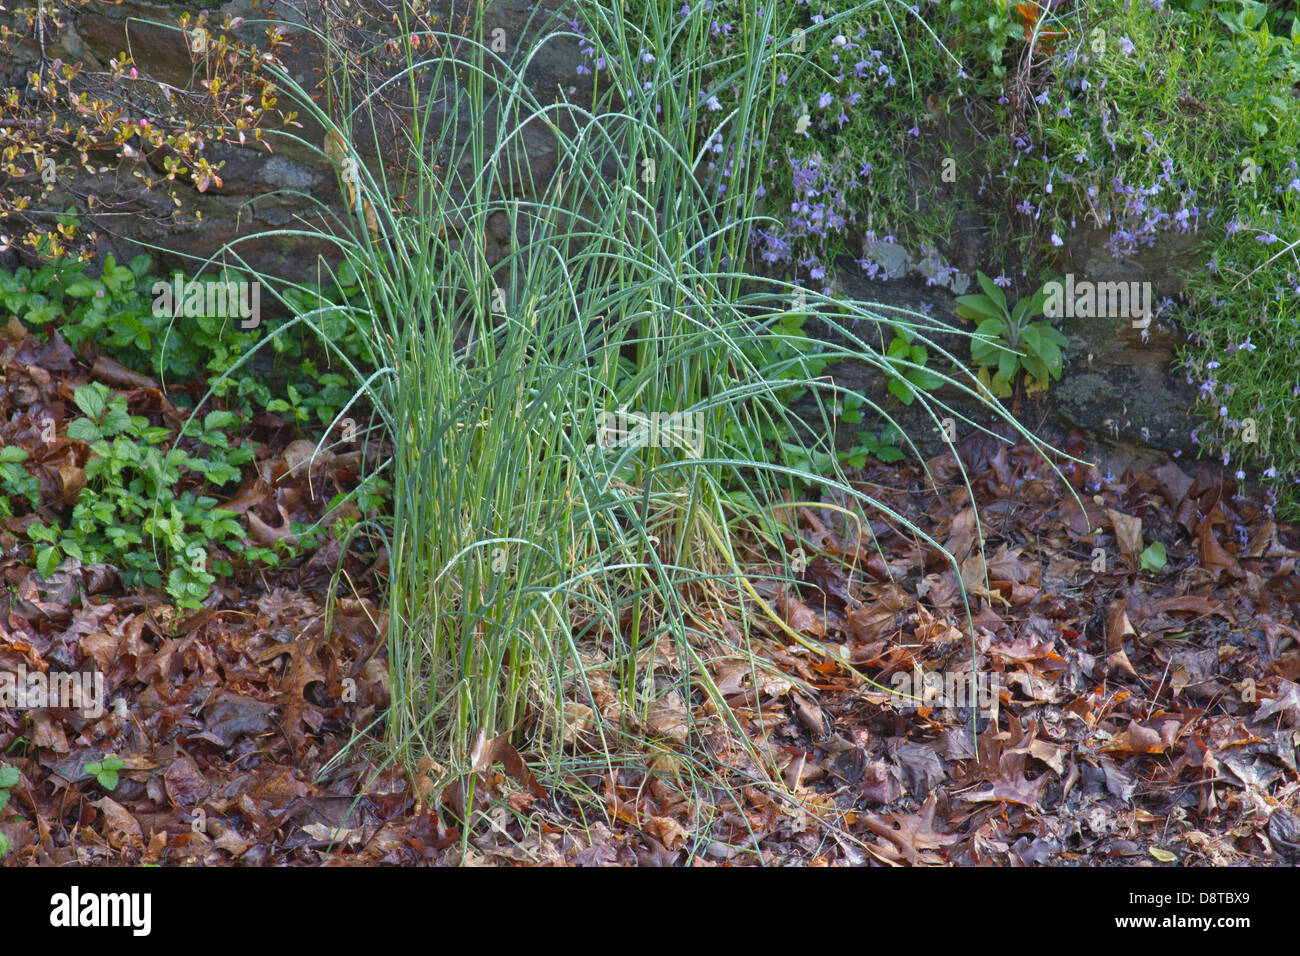 Wild onion grass growing in a garden in early spring Stock Photo